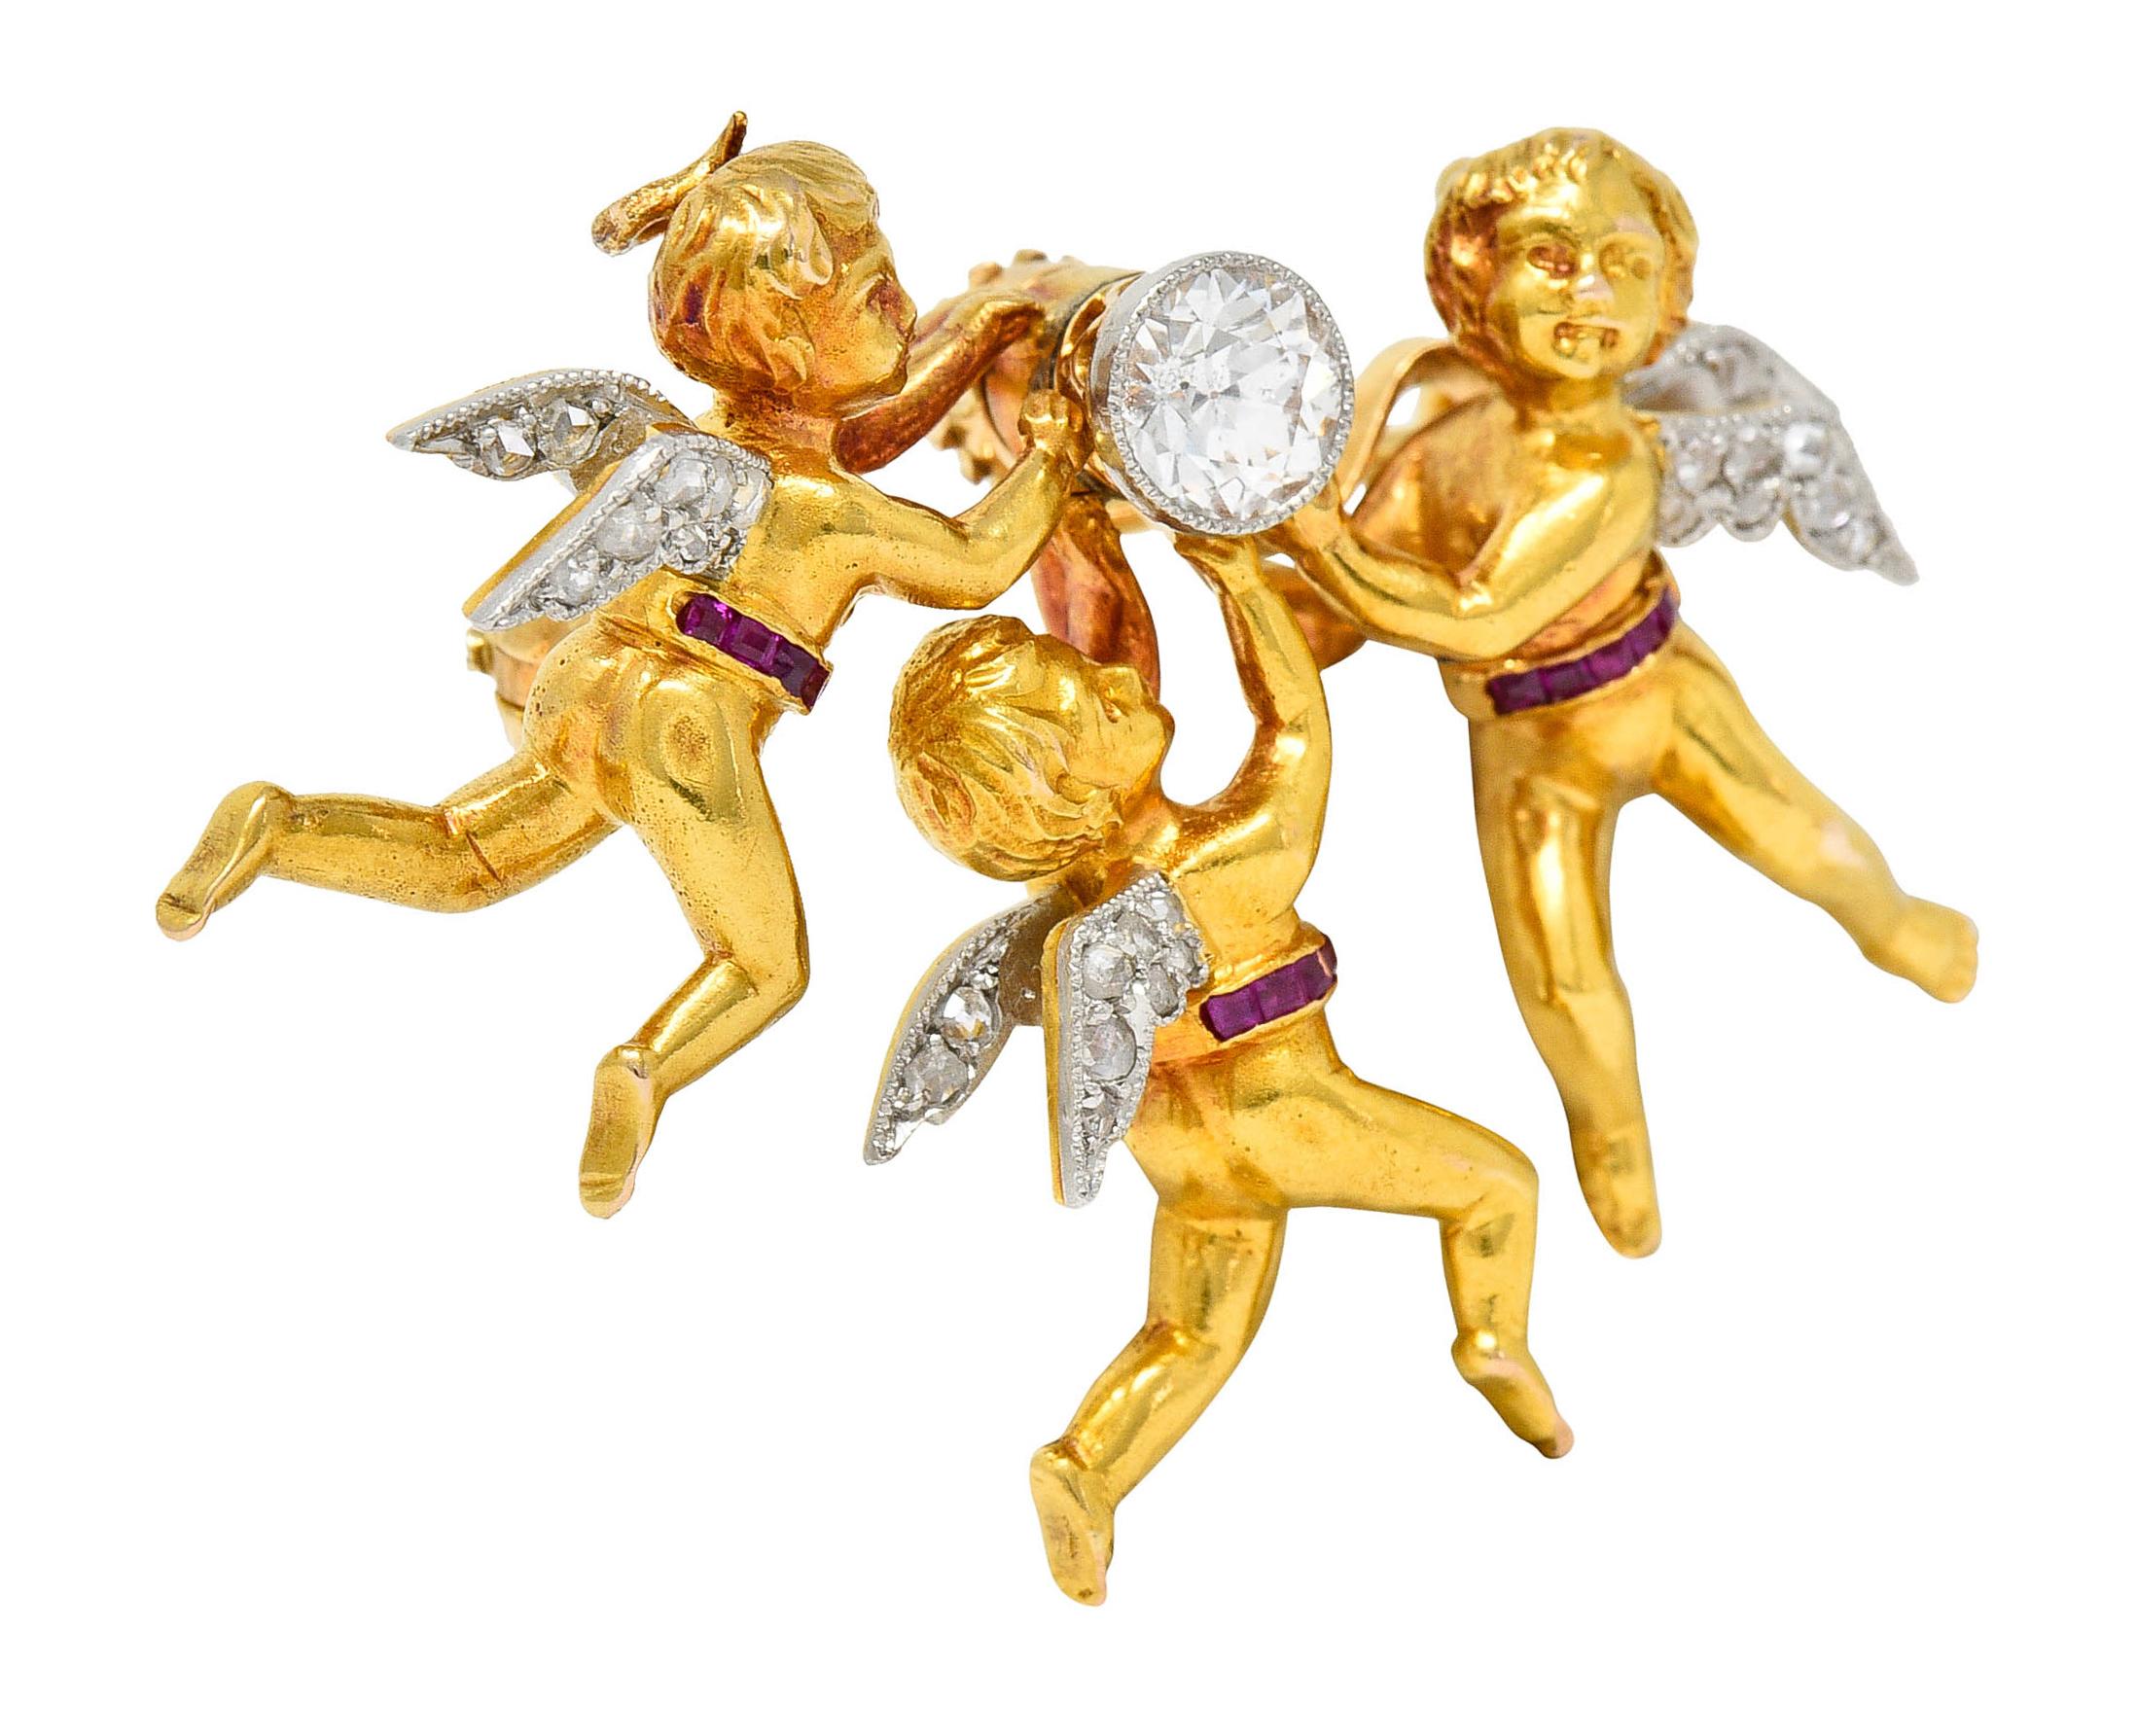 Pendant brooch is designed as a triad of winged cherubs uplifting an old European cut diamond

Bezel set in platinum while weighing approximately 0.52 carat with I/J color and SI clarity

Wings are accented by rose cut diamonds weighing